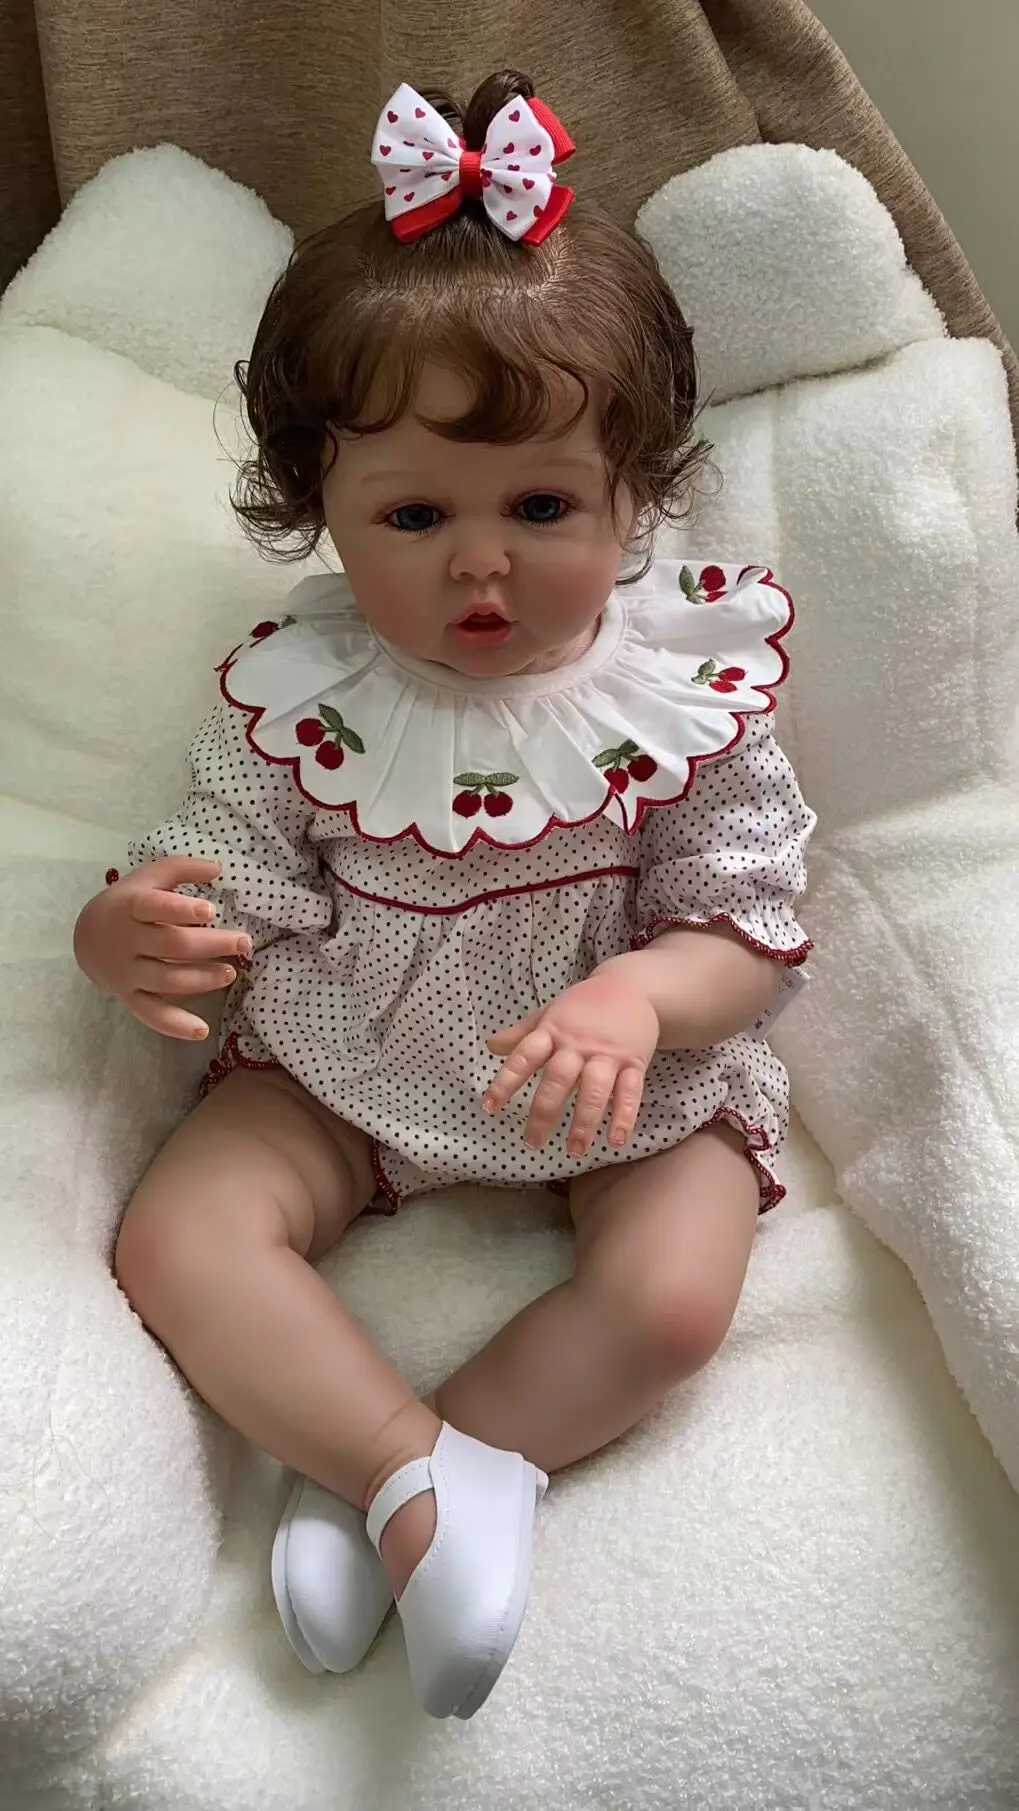 Popular Silicone Baby Doll That Look Real Newborn Lifelike Real Soft Touch Hand-Rooted Hair High Quality Handmade Art Doll Gift